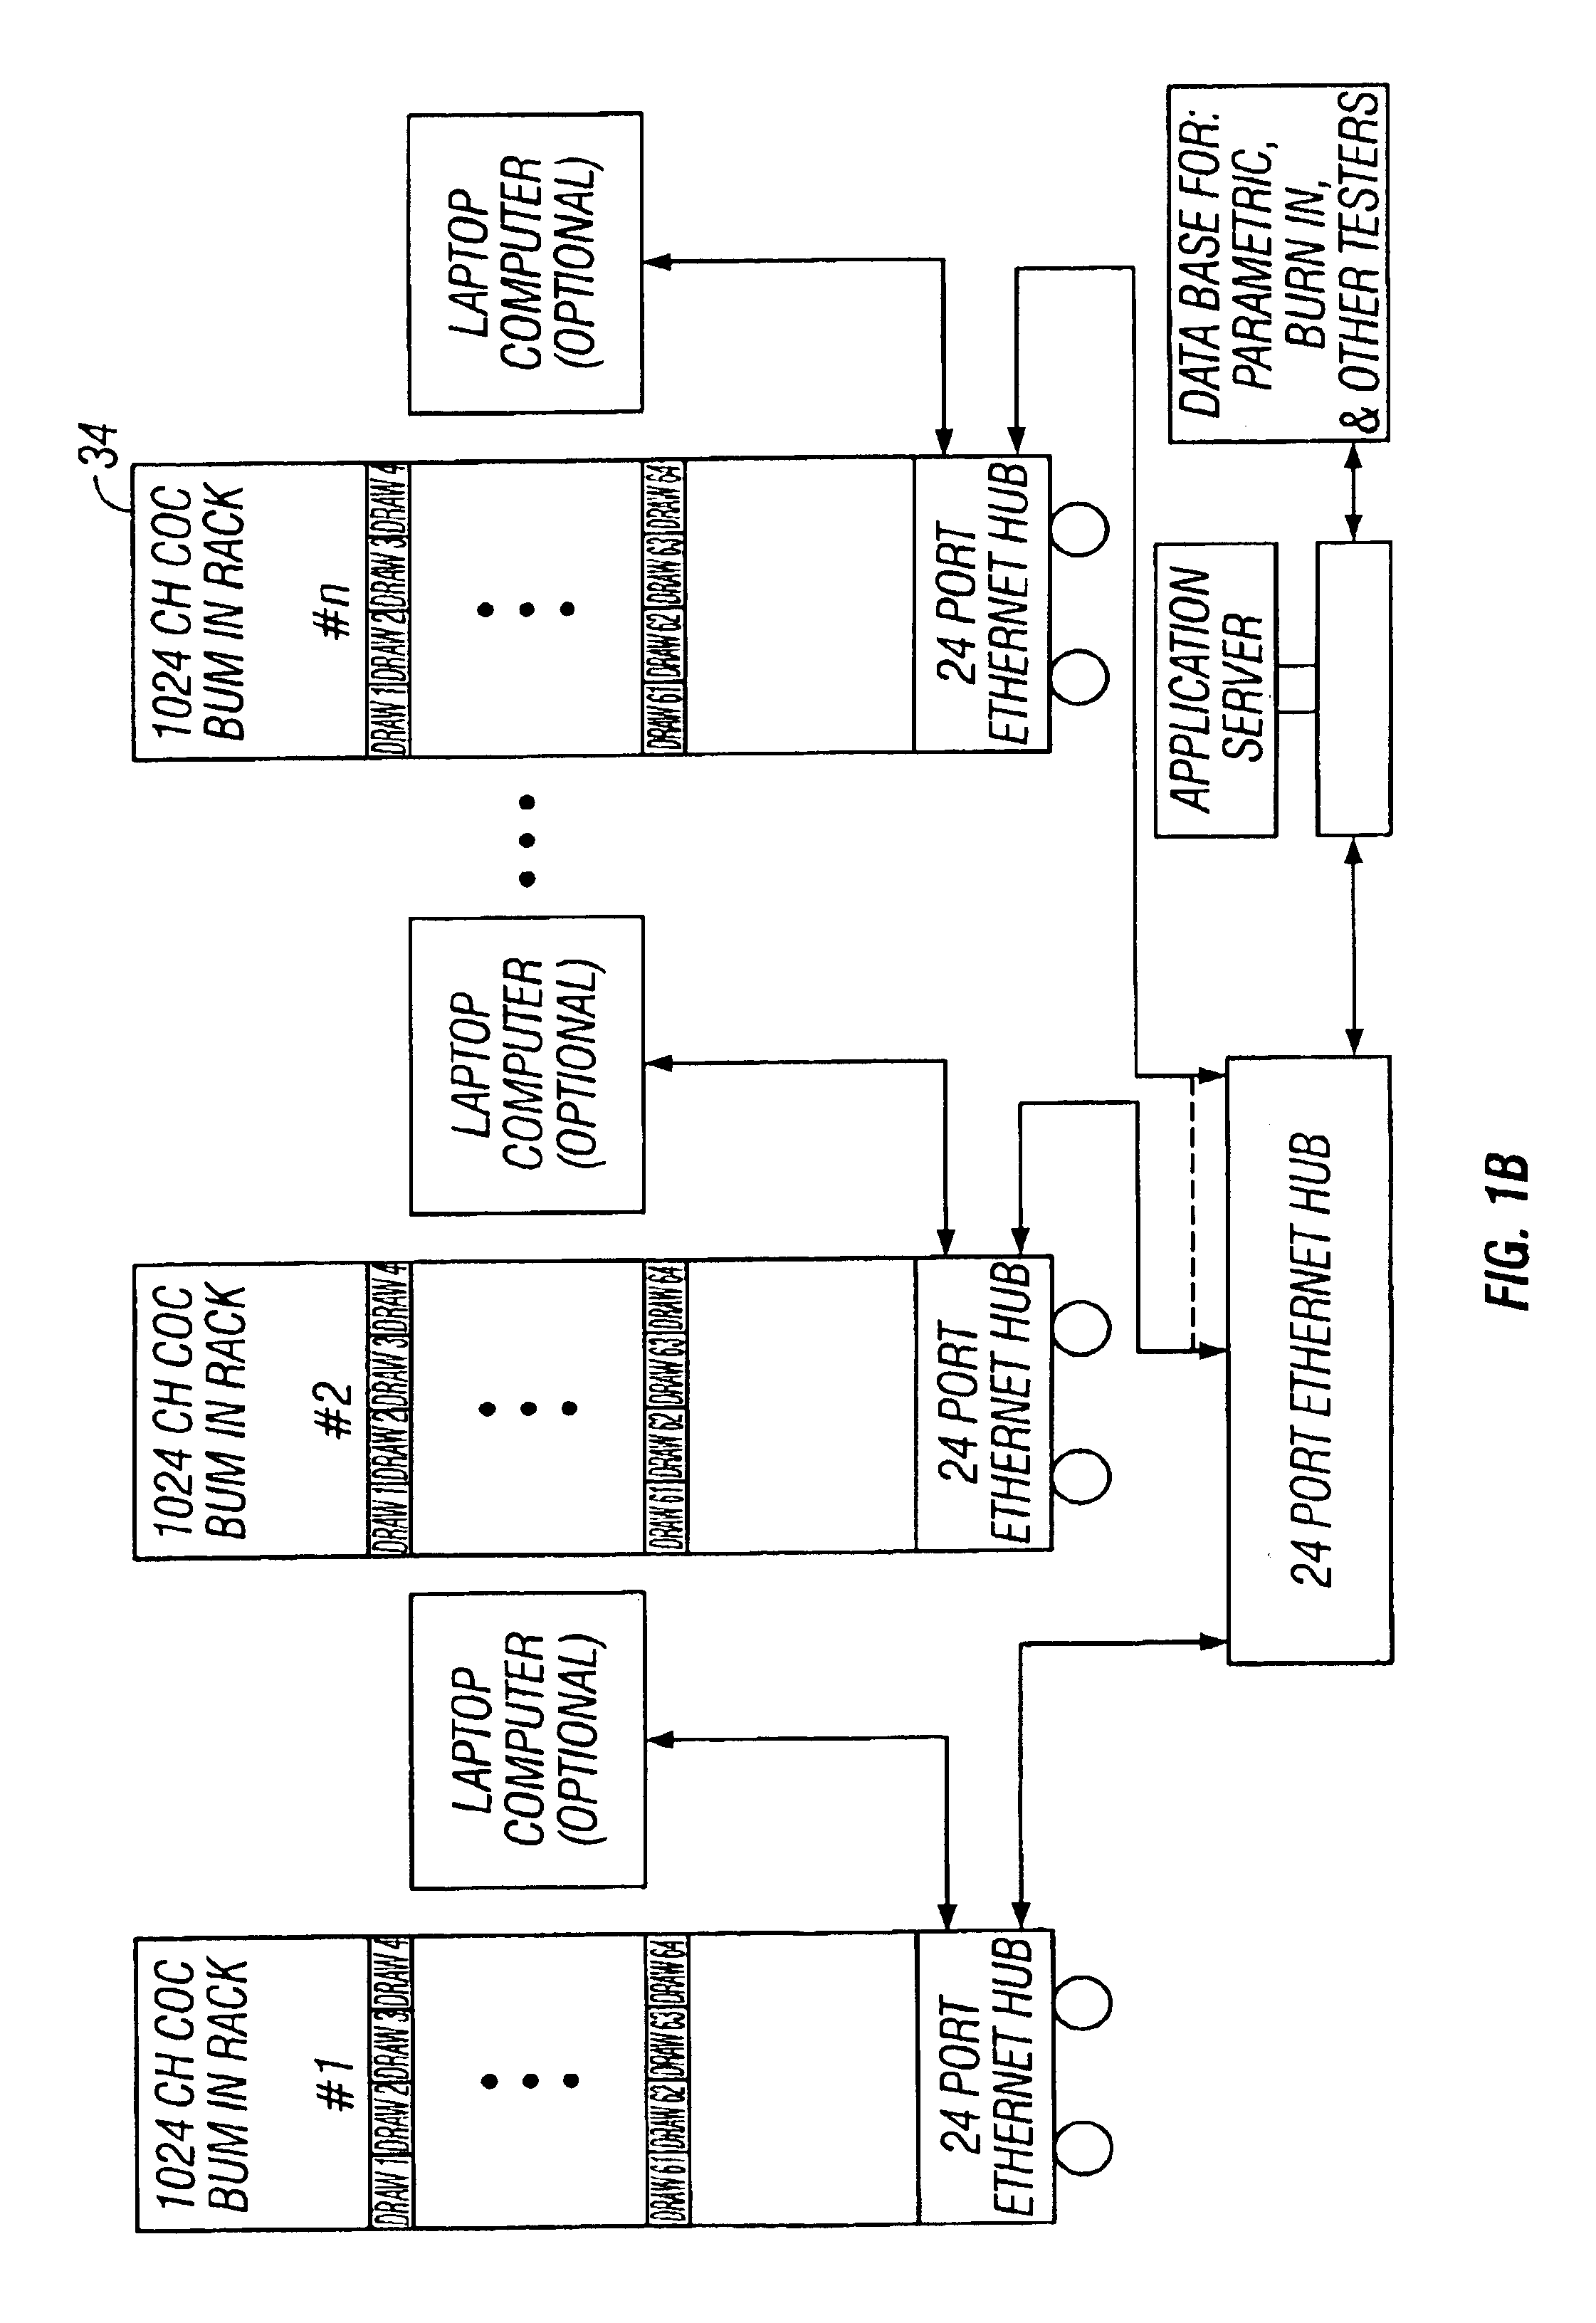 Automated laser diode test system